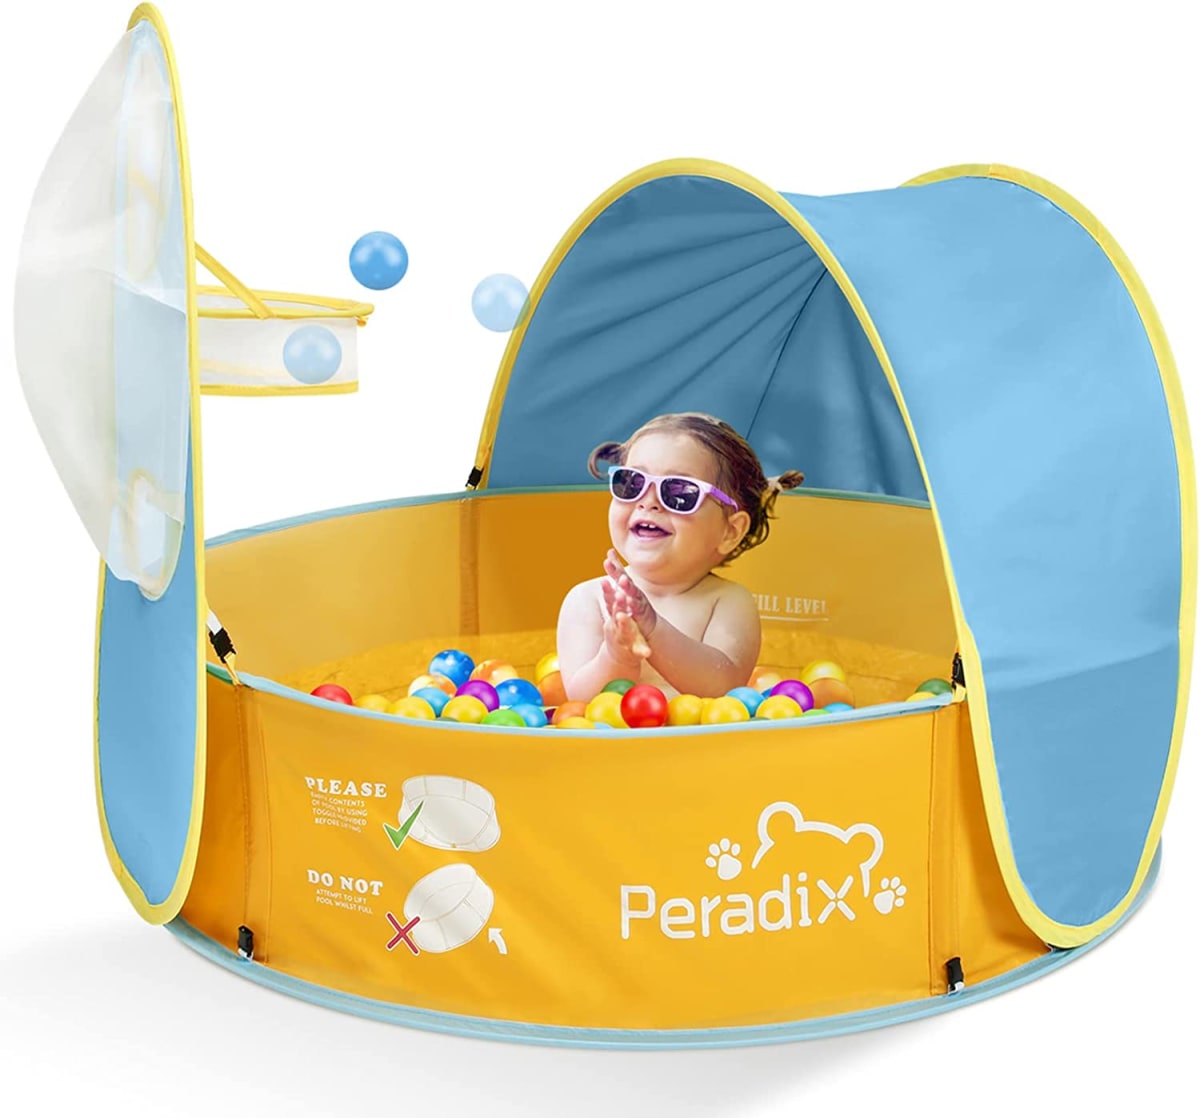 Paddling Pool for Kids & Pets, Kids Ball Pit Tent 3 in 1, Pop Up Wading Pool Tent with UV Protection Sunshade Canopy Basketball Hoop, Portable Beach Backyard Toys for Indoor Outdoor Activity